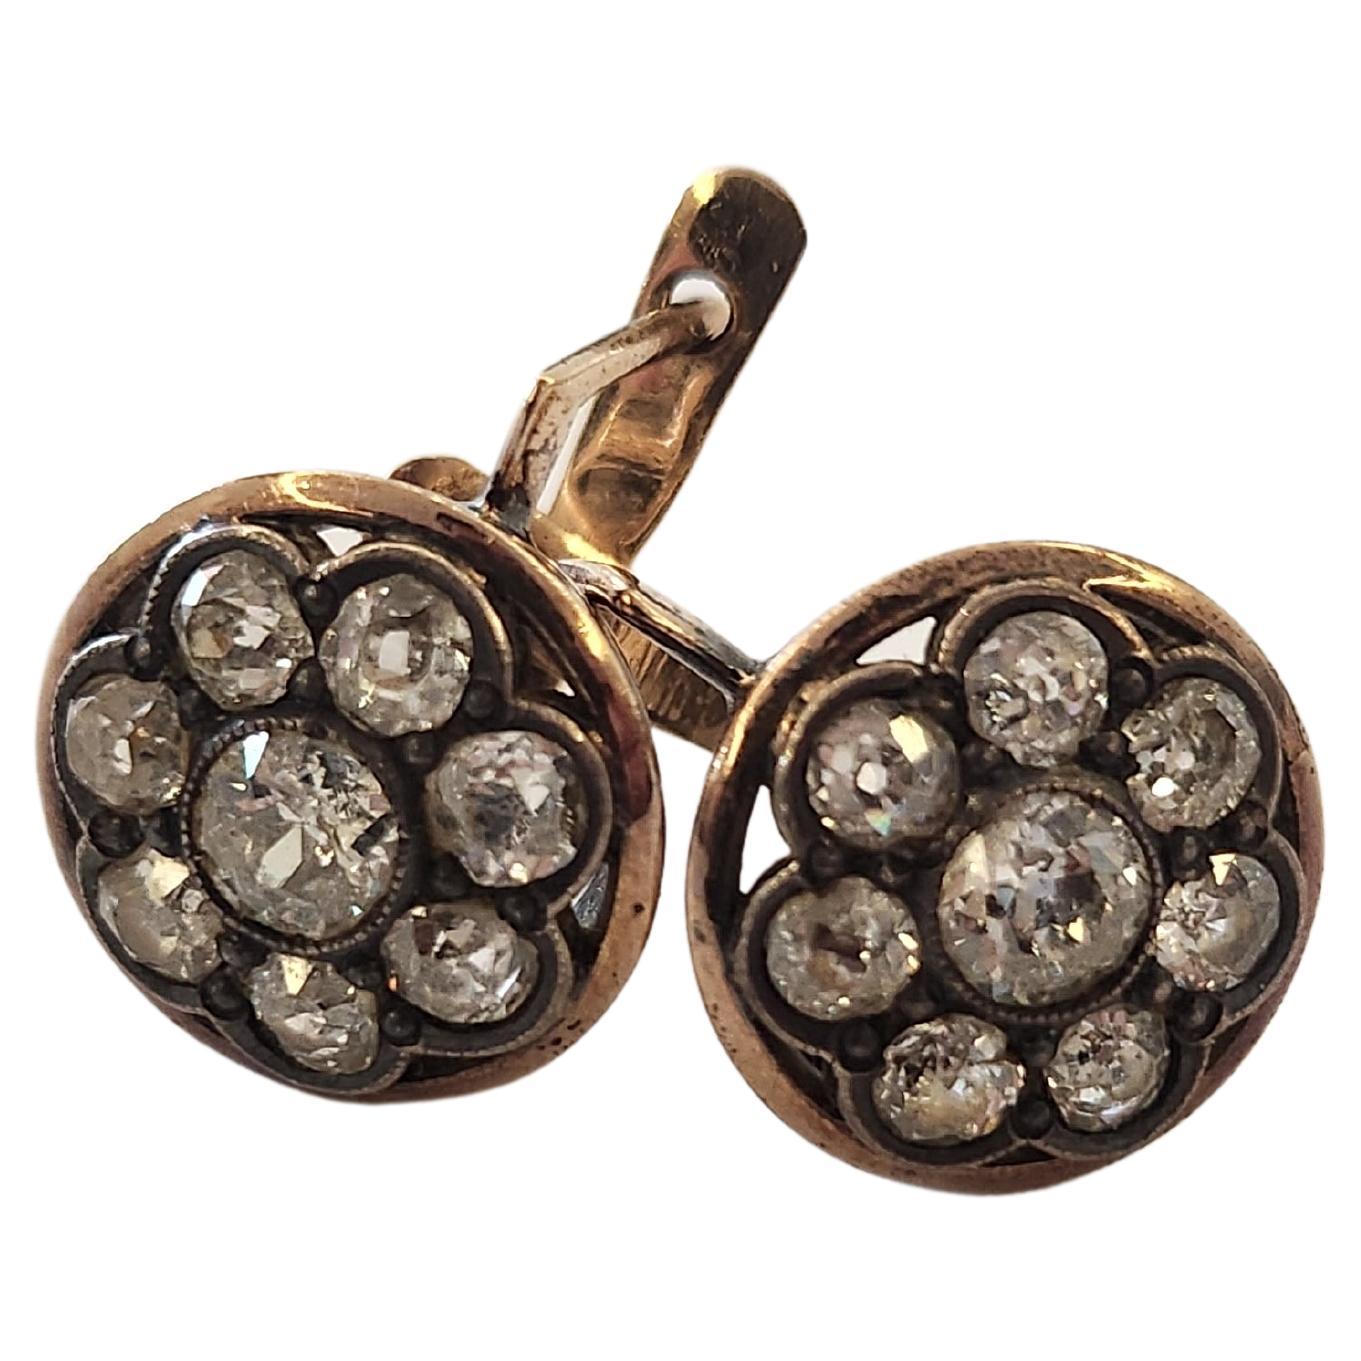 Old mine diamond earrings in round circled designe in 14k gold setting topped with silver with estimate old mine cut diamonds weight of 1.80 carats centered with larger diamond flanked with smaller diamonds earrings was made during the early soviet